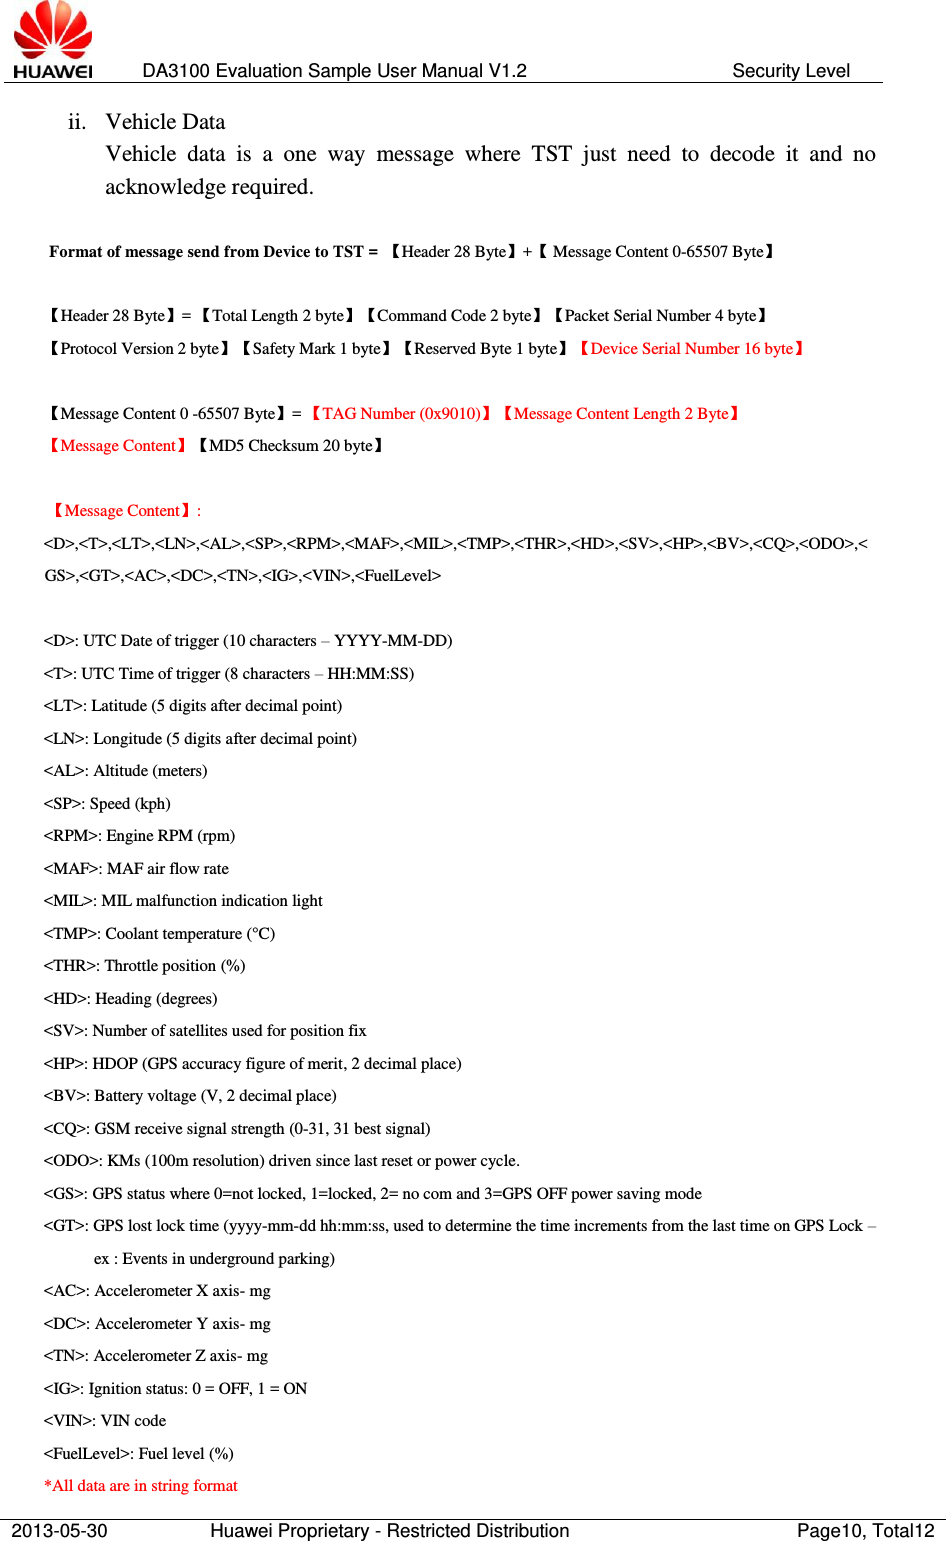   DA3100 Evaluation Sample User Manual V1.2 Security Level  2013-05-30 Huawei Proprietary - Restricted Distribution Page10, Total12  ii. Vehicle Data Vehicle  data  is  a  one  way  message  where  TST  just  need  to  decode  it  and  no acknowledge required.       Format of message send from Device to TST =  【Header 28 Byte】+【 Message Content 0-65507 Byte】  【Header 28 Byte】= 【Total Length 2 byte】【Command Code 2 byte】【Packet Serial Number 4 byte】 【Protocol Version 2 byte】【Safety Mark 1 byte】【Reserved Byte 1 byte】【Device Serial Number 16 byte】  【Message Content 0 -65507 Byte】= 【TAG Number (0x9010)】【Message Content Length 2 Byte】 【Message Content】【MD5 Checksum 20 byte】    【Message Content】: &lt;D&gt;,&lt;T&gt;,&lt;LT&gt;,&lt;LN&gt;,&lt;AL&gt;,&lt;SP&gt;,&lt;RPM&gt;,&lt;MAF&gt;,&lt;MIL&gt;,&lt;TMP&gt;,&lt;THR&gt;,&lt;HD&gt;,&lt;SV&gt;,&lt;HP&gt;,&lt;BV&gt;,&lt;CQ&gt;,&lt;ODO&gt;,&lt;GS&gt;,&lt;GT&gt;,&lt;AC&gt;,&lt;DC&gt;,&lt;TN&gt;,&lt;IG&gt;,&lt;VIN&gt;,&lt;FuelLevel&gt;    &lt;D&gt;: UTC Date of trigger (10 characters – YYYY-MM-DD) &lt;T&gt;: UTC Time of trigger (8 characters – HH:MM:SS) &lt;LT&gt;: Latitude (5 digits after decimal point) &lt;LN&gt;: Longitude (5 digits after decimal point) &lt;AL&gt;: Altitude (meters) &lt;SP&gt;: Speed (kph)  &lt;RPM&gt;: Engine RPM (rpm) &lt;MAF&gt;: MAF air flow rate &lt;MIL&gt;: MIL malfunction indication light &lt;TMP&gt;: Coolant temperature (°C) &lt;THR&gt;: Throttle position (%) &lt;HD&gt;: Heading (degrees) &lt;SV&gt;: Number of satellites used for position fix &lt;HP&gt;: HDOP (GPS accuracy figure of merit, 2 decimal place) &lt;BV&gt;: Battery voltage (V, 2 decimal place) &lt;CQ&gt;: GSM receive signal strength (0-31, 31 best signal) &lt;ODO&gt;: KMs (100m resolution) driven since last reset or power cycle.   &lt;GS&gt;: GPS status where 0=not locked, 1=locked, 2= no com and 3=GPS OFF power saving mode &lt;GT&gt;: GPS lost lock time (yyyy-mm-dd hh:mm:ss, used to determine the time increments from the last time on GPS Lock – ex : Events in underground parking) &lt;AC&gt;: Accelerometer X axis- mg &lt;DC&gt;: Accelerometer Y axis- mg &lt;TN&gt;: Accelerometer Z axis- mg &lt;IG&gt;: Ignition status: 0 = OFF, 1 = ON &lt;VIN&gt;: VIN code &lt;FuelLevel&gt;: Fuel level (%) *All data are in string format 